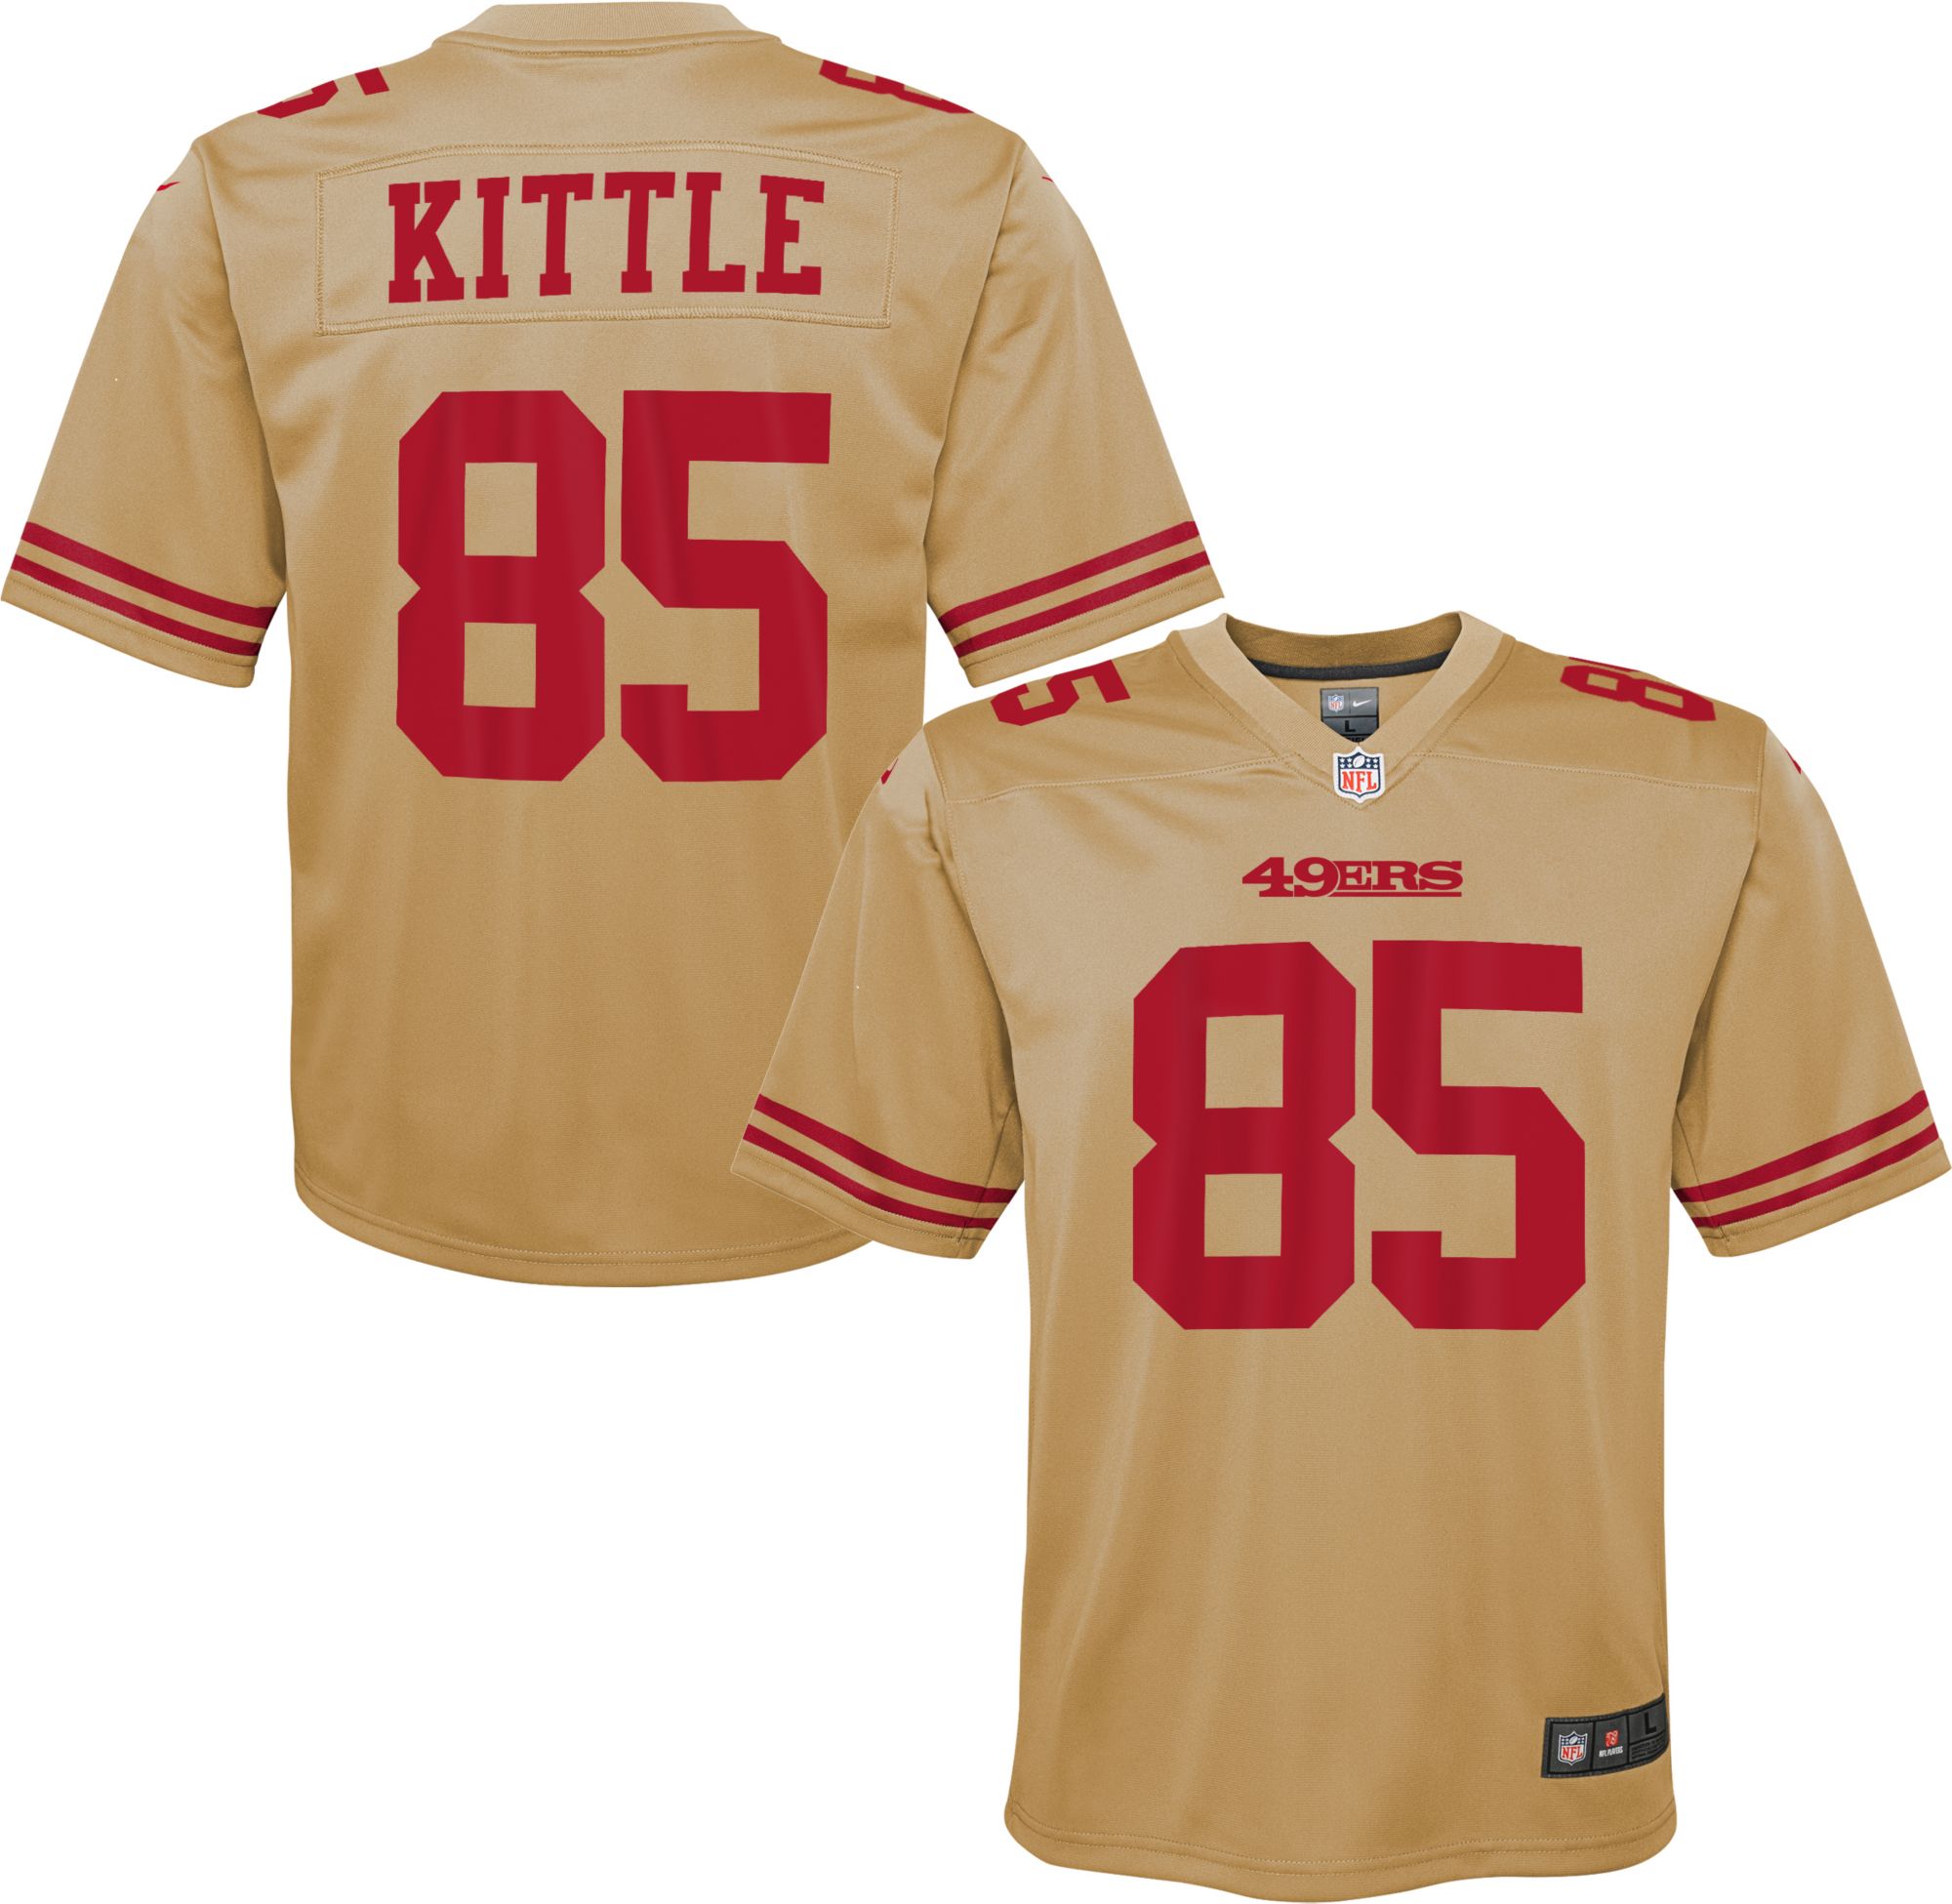 george kittle jersey for sale